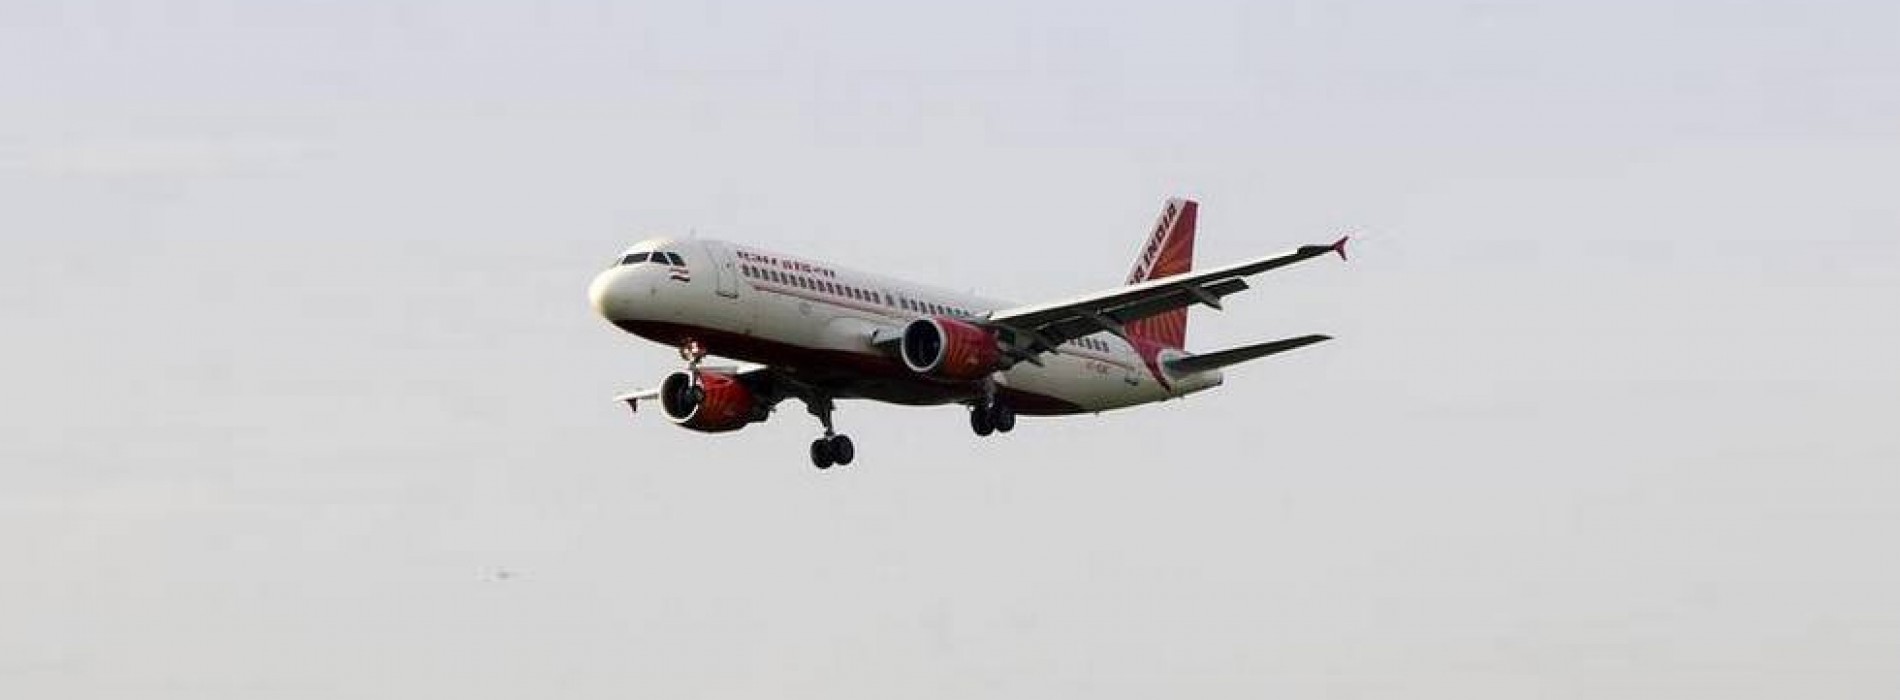 Air India’s operational profit rises to Rs 215 crore in 2016-17